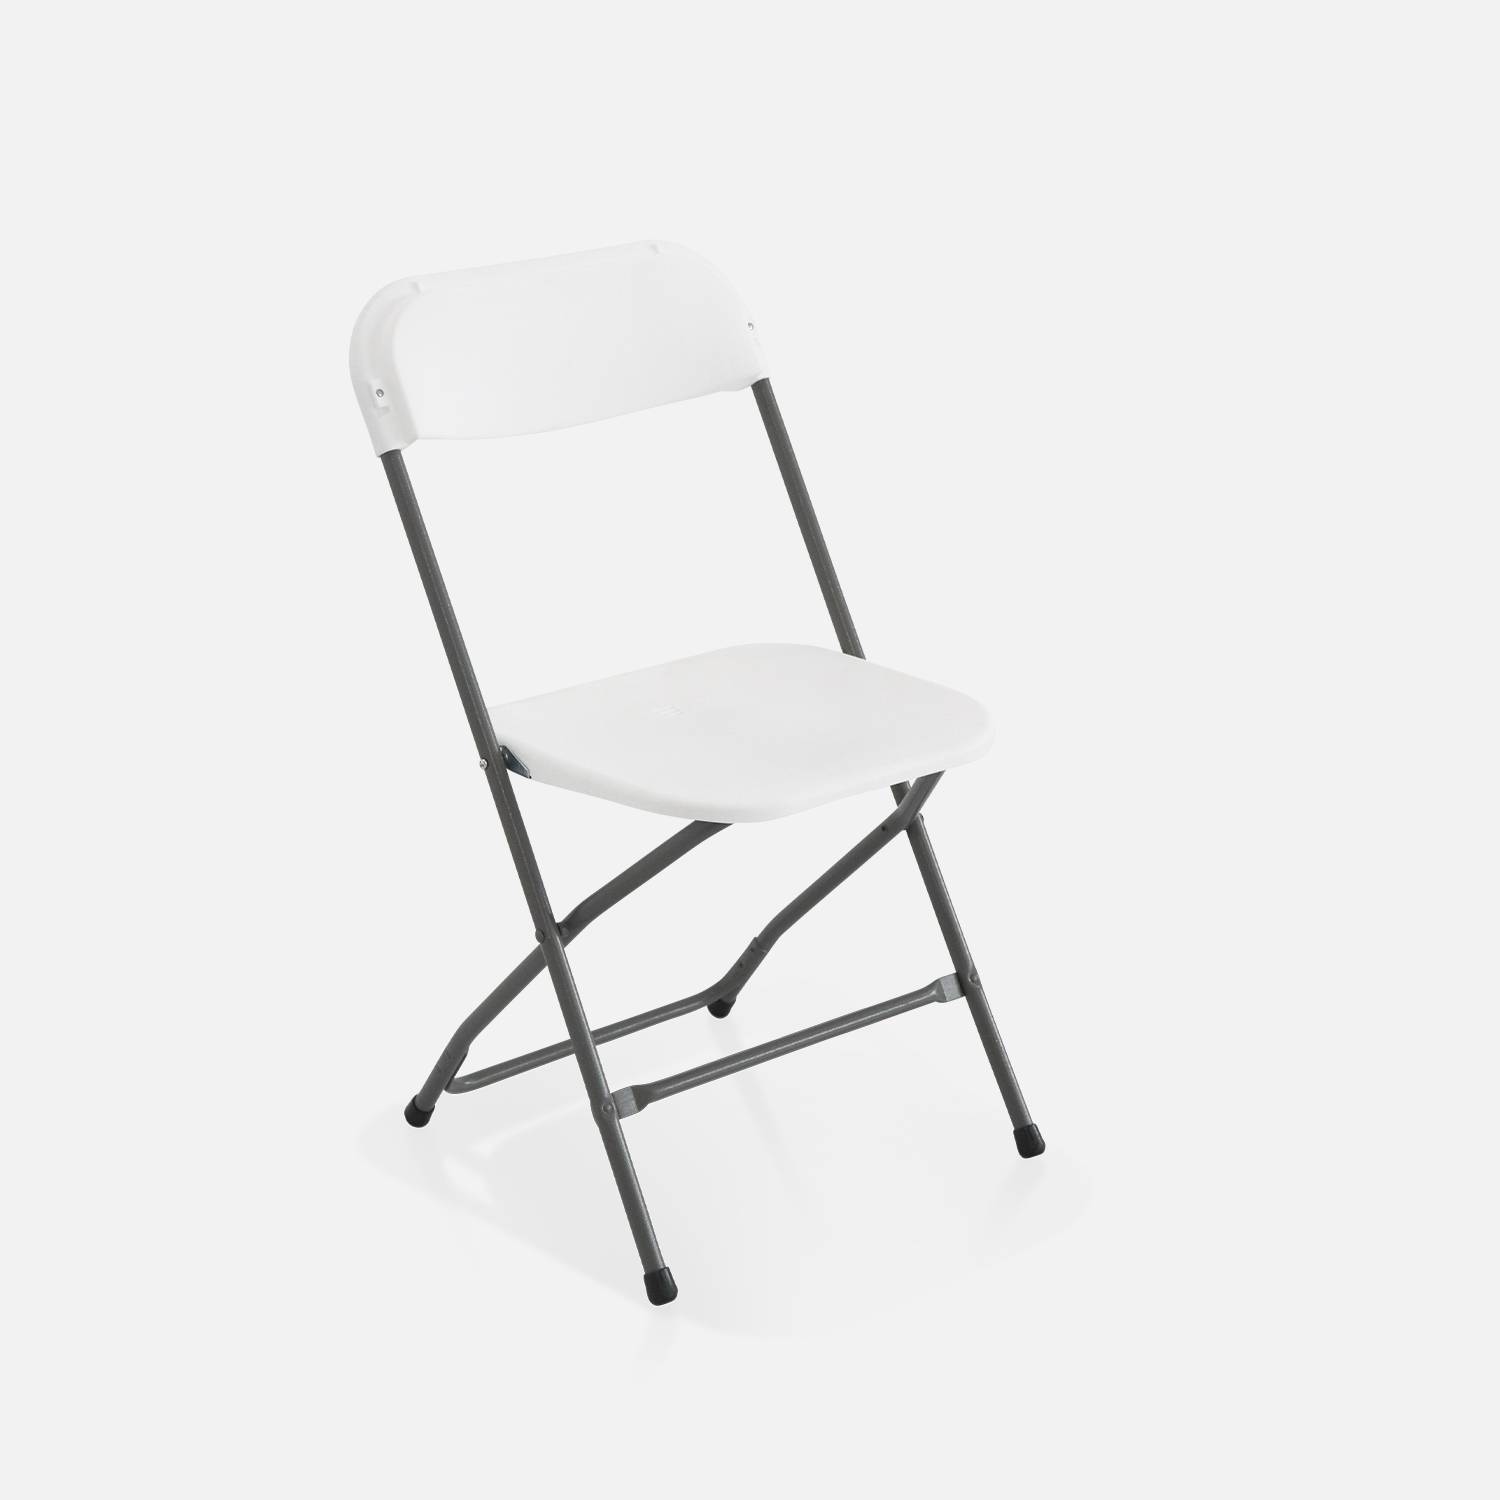 Set of 6 folding event chairs - Fiesta - plastic seats and metal frame, white Photo4